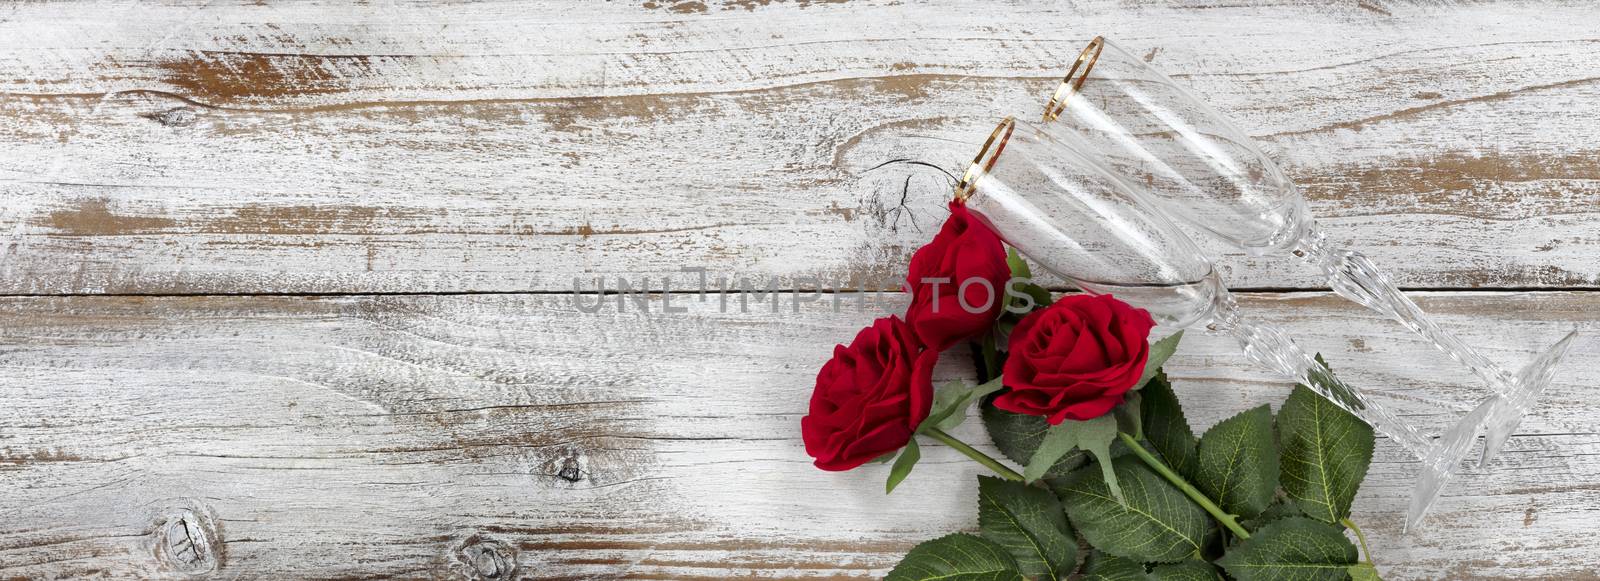 Happy Valentines Day celebration with red roses and drinking glasses on white rustic wooden background   